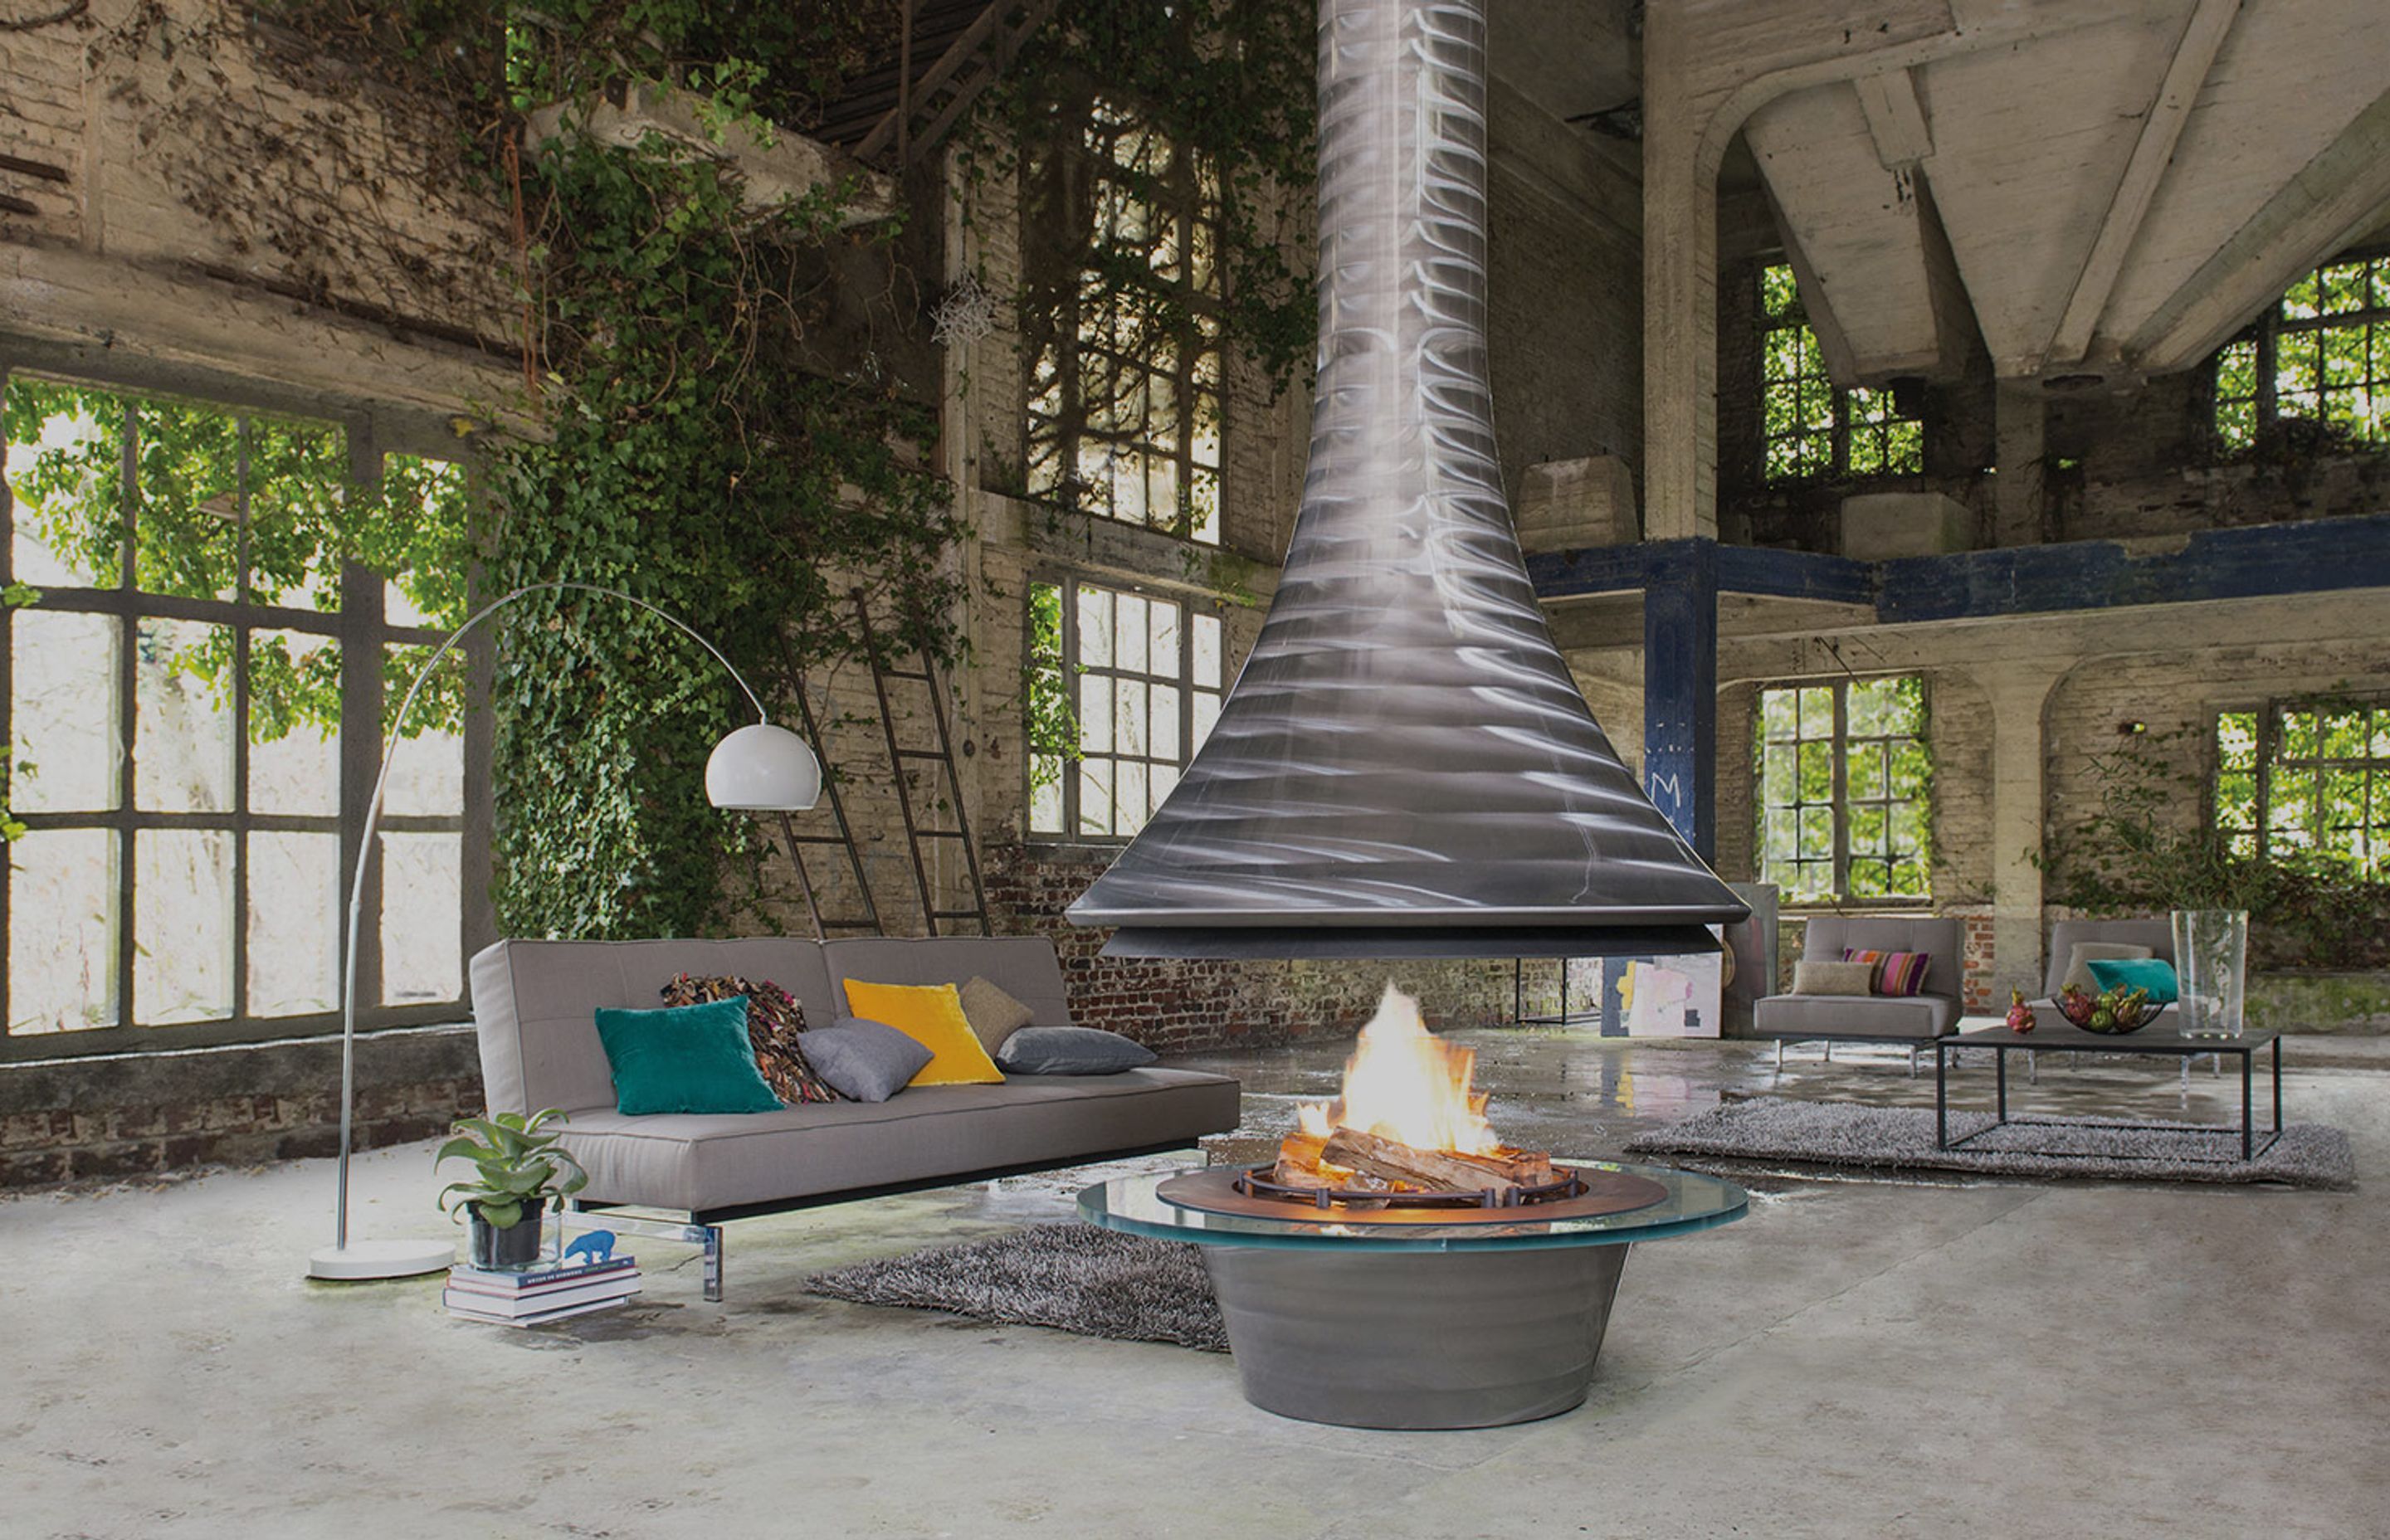 House of Home Interviews: Sculpt Fireplaces